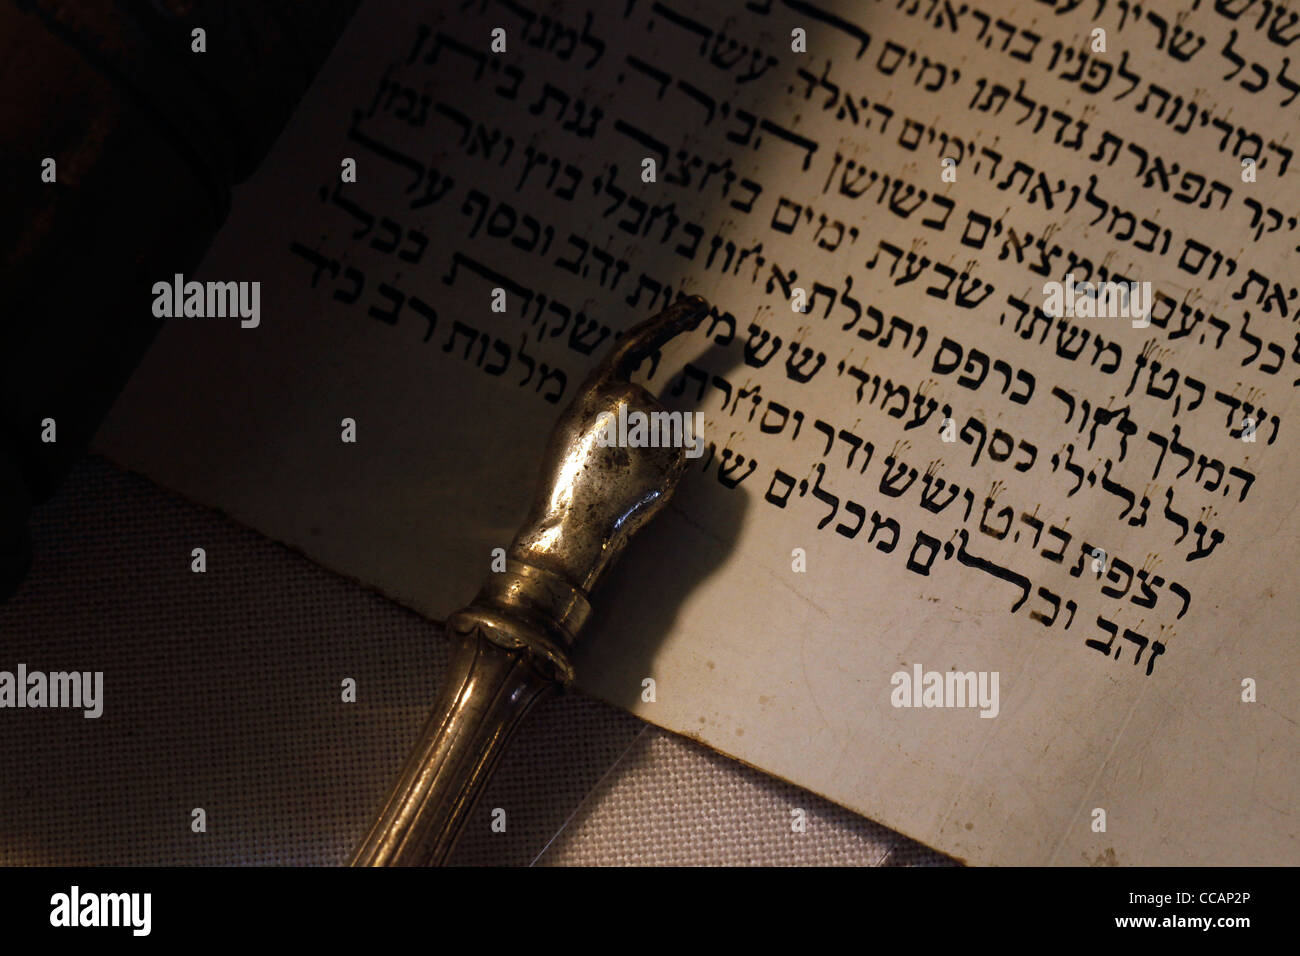 A silver Yad Jewish ritual pointer, popularly known as a Torah pointer, used by the reader to follow the text during the Torah reading from the parchment Torah scrolls Stock Photo